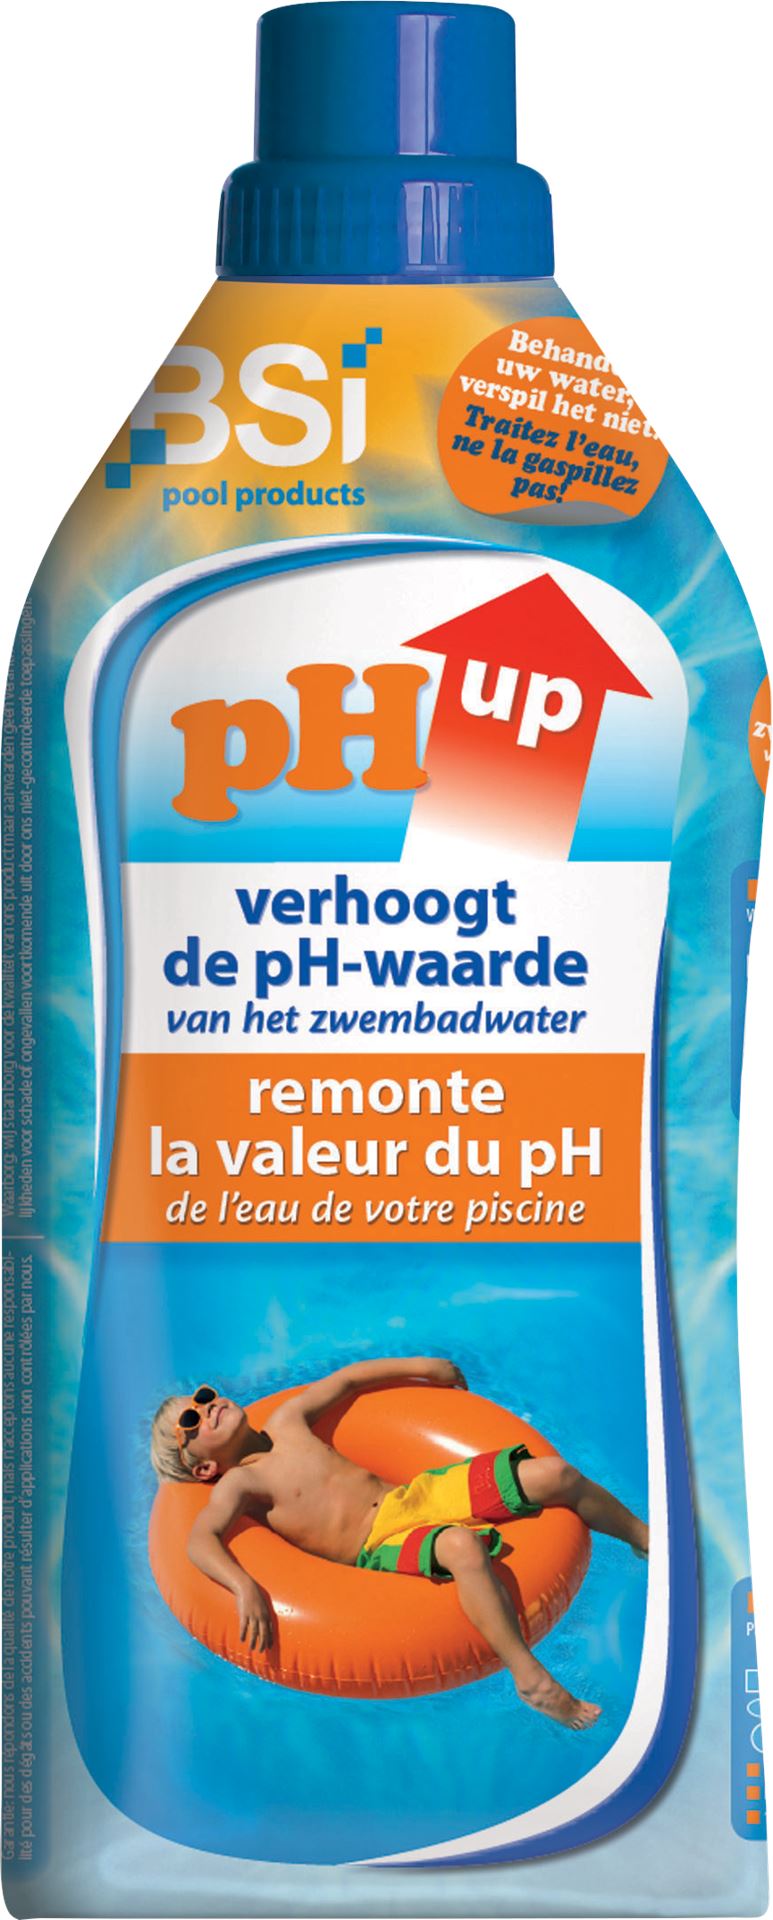 BSI pH Up liquid 1L - increases the pH level of your pool or spa